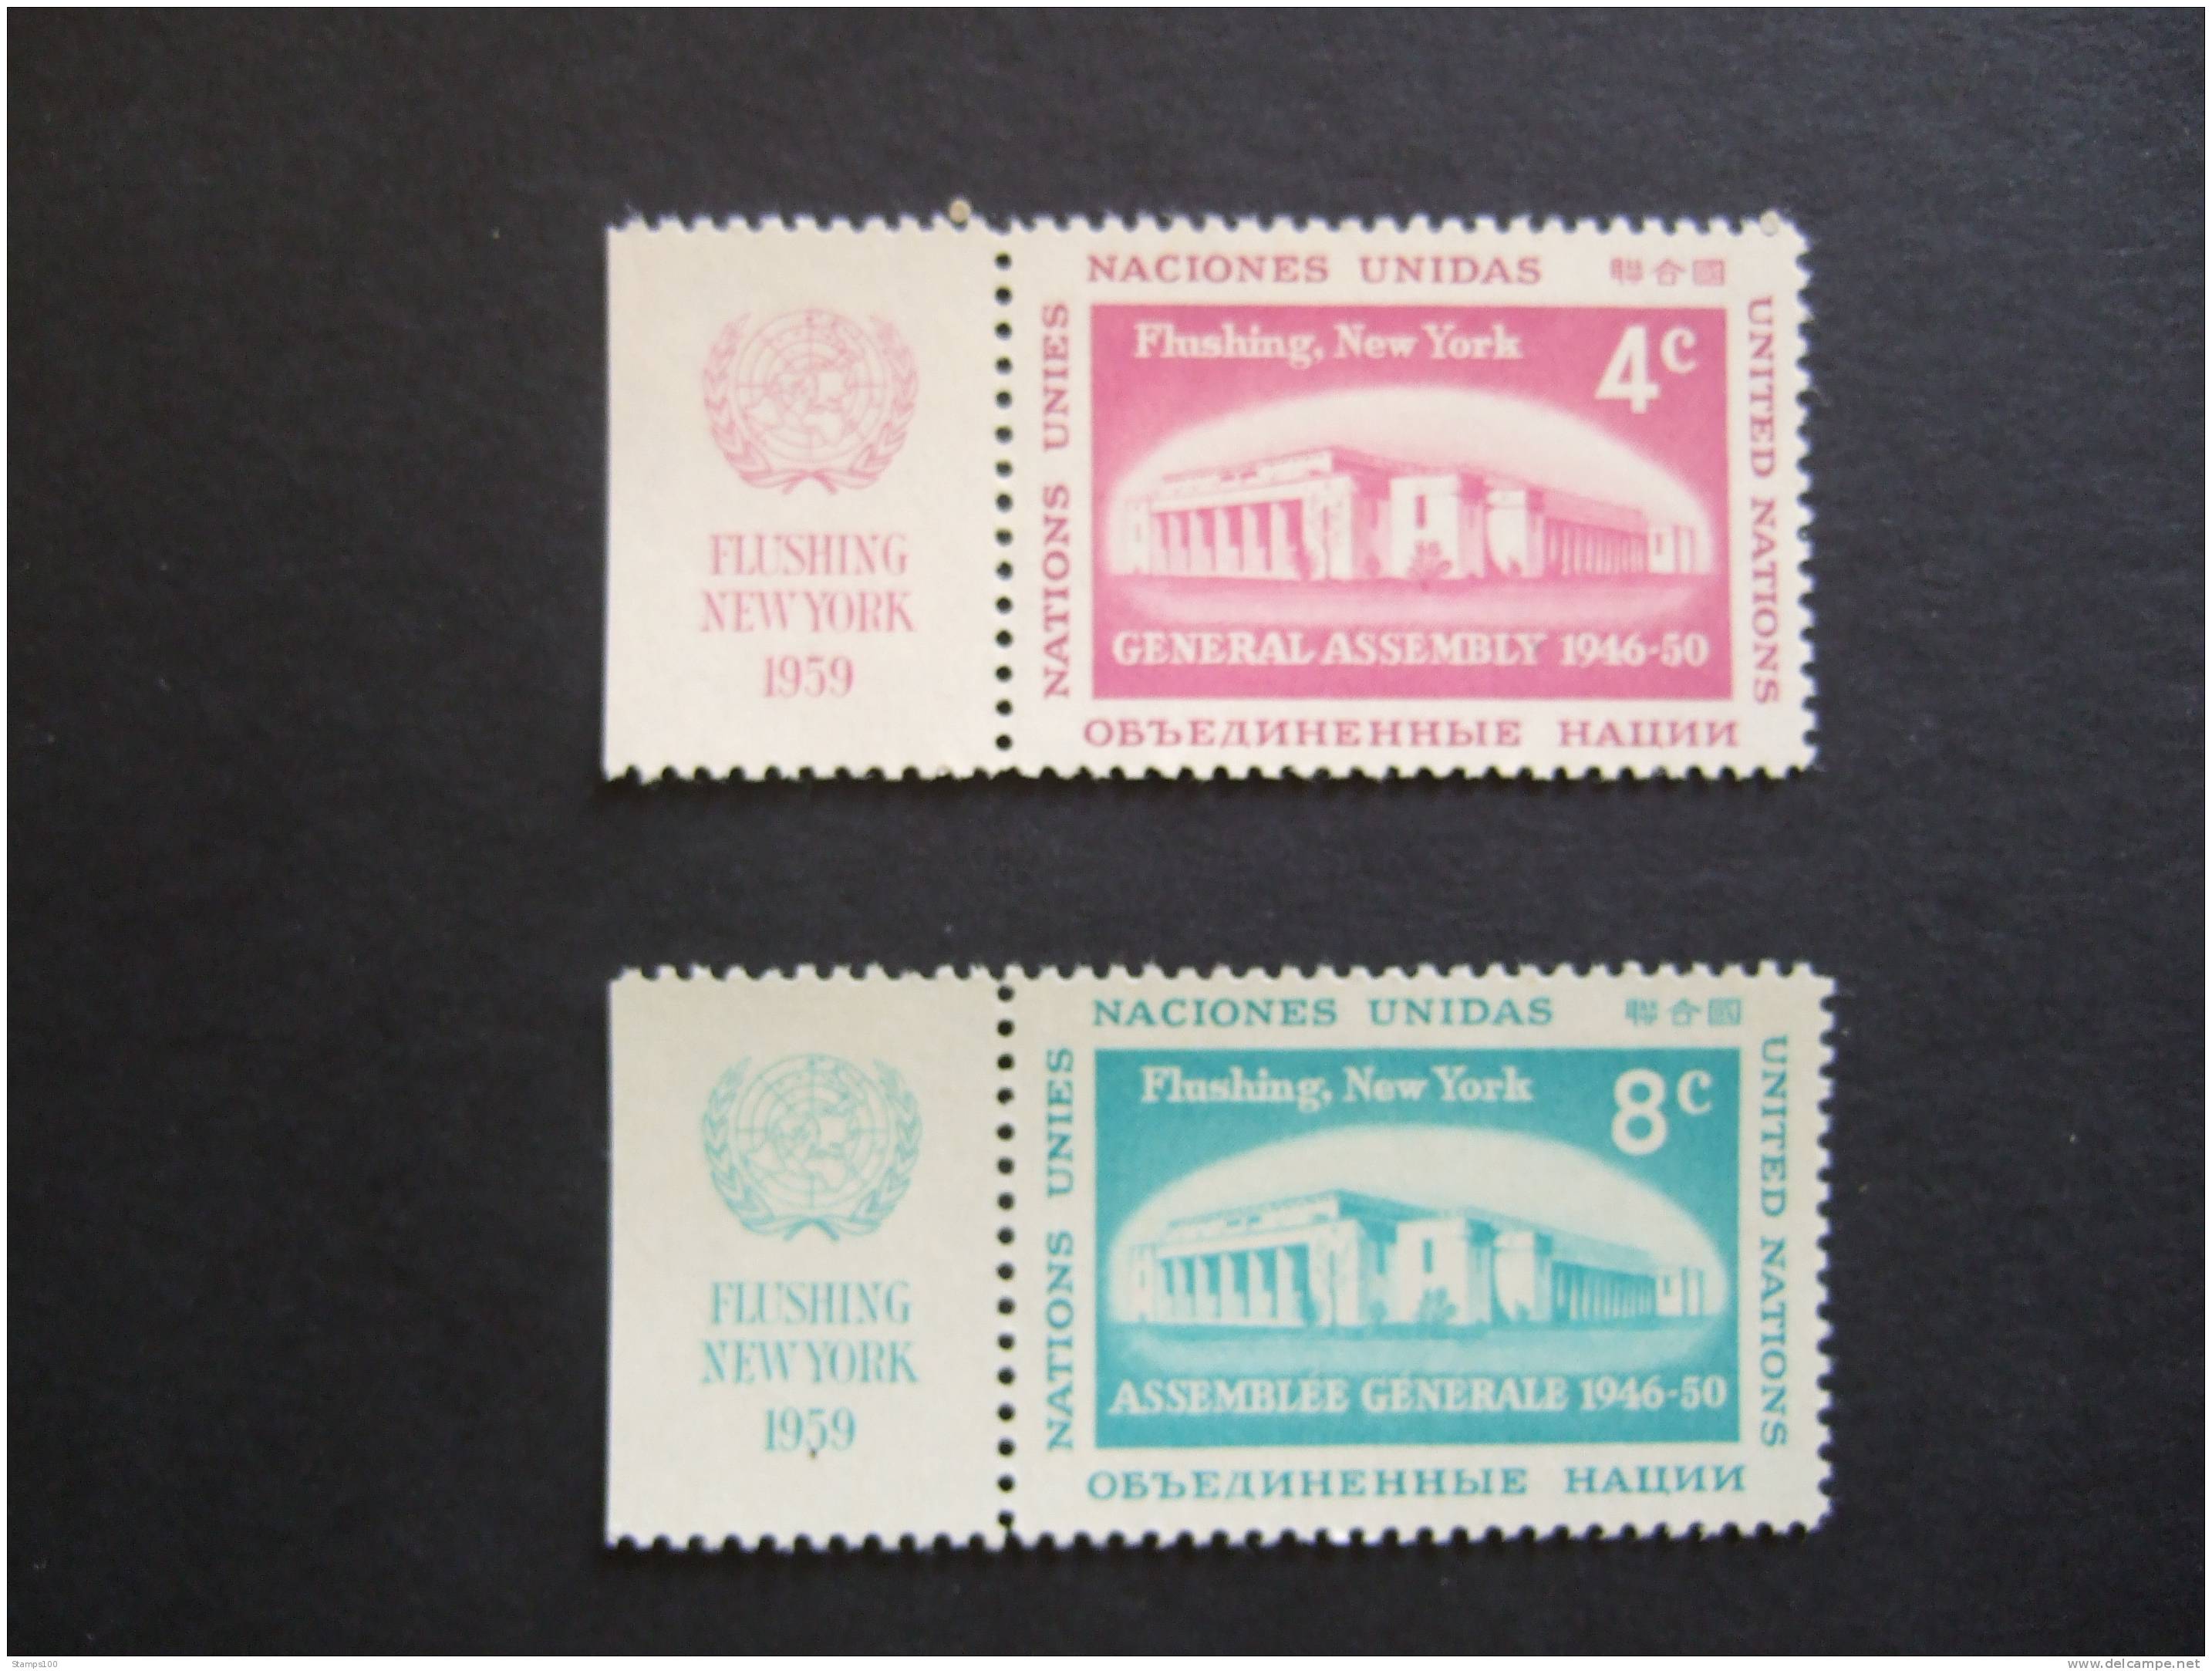 UNITED NATIONS NEW YORK, 1959,  Yv 69-70, WITH UN LOGO, MNH**, (P39-025) - Nuevos